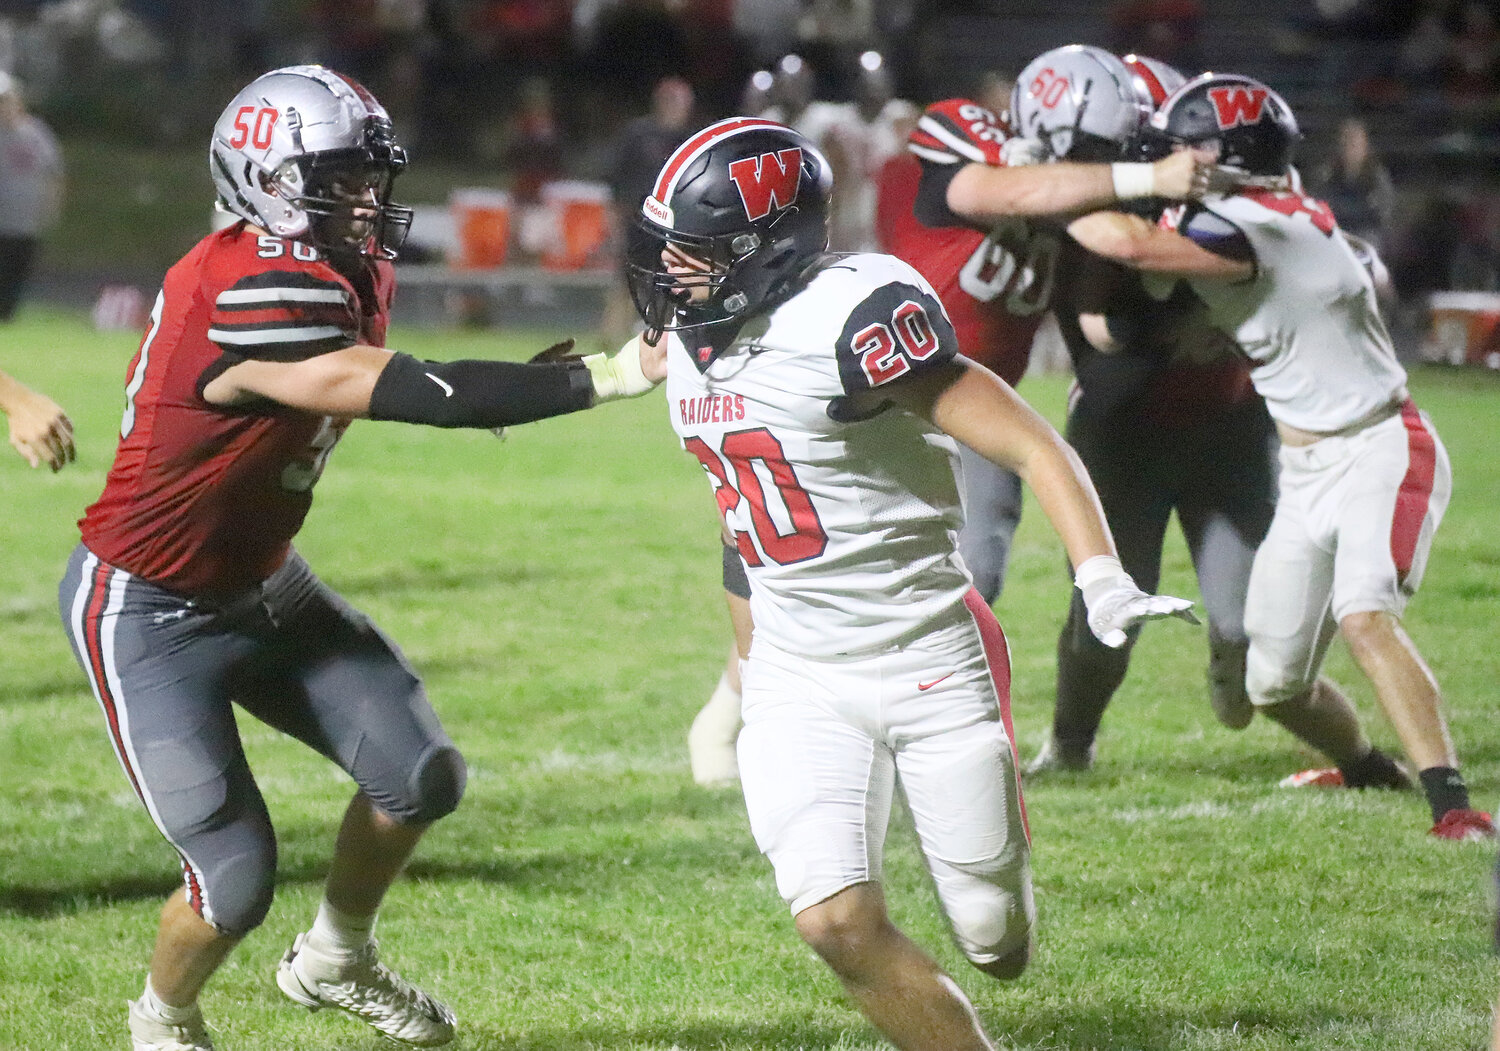 Senior Ike Thacher engages with the Raiders' Dylan Weisskopf on the front end of a running play in the fourth quarter Friday night in Fort Madison.